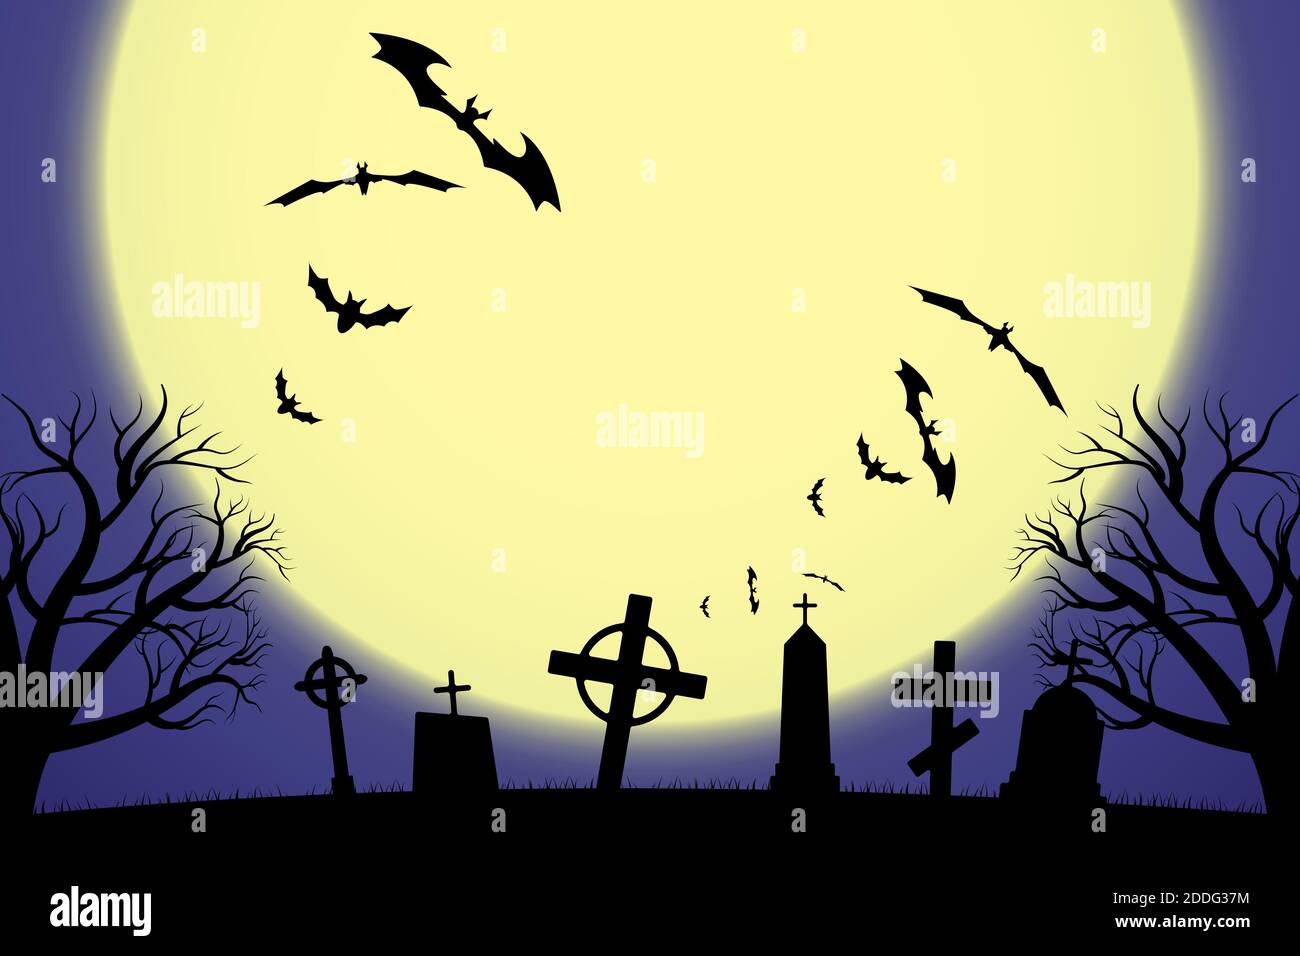 Halloween scary graveyard background with trees, crosses and bats. Halloween. Silhouette of a tombstone. Printed labels and decorations for office, cr Stock Vector